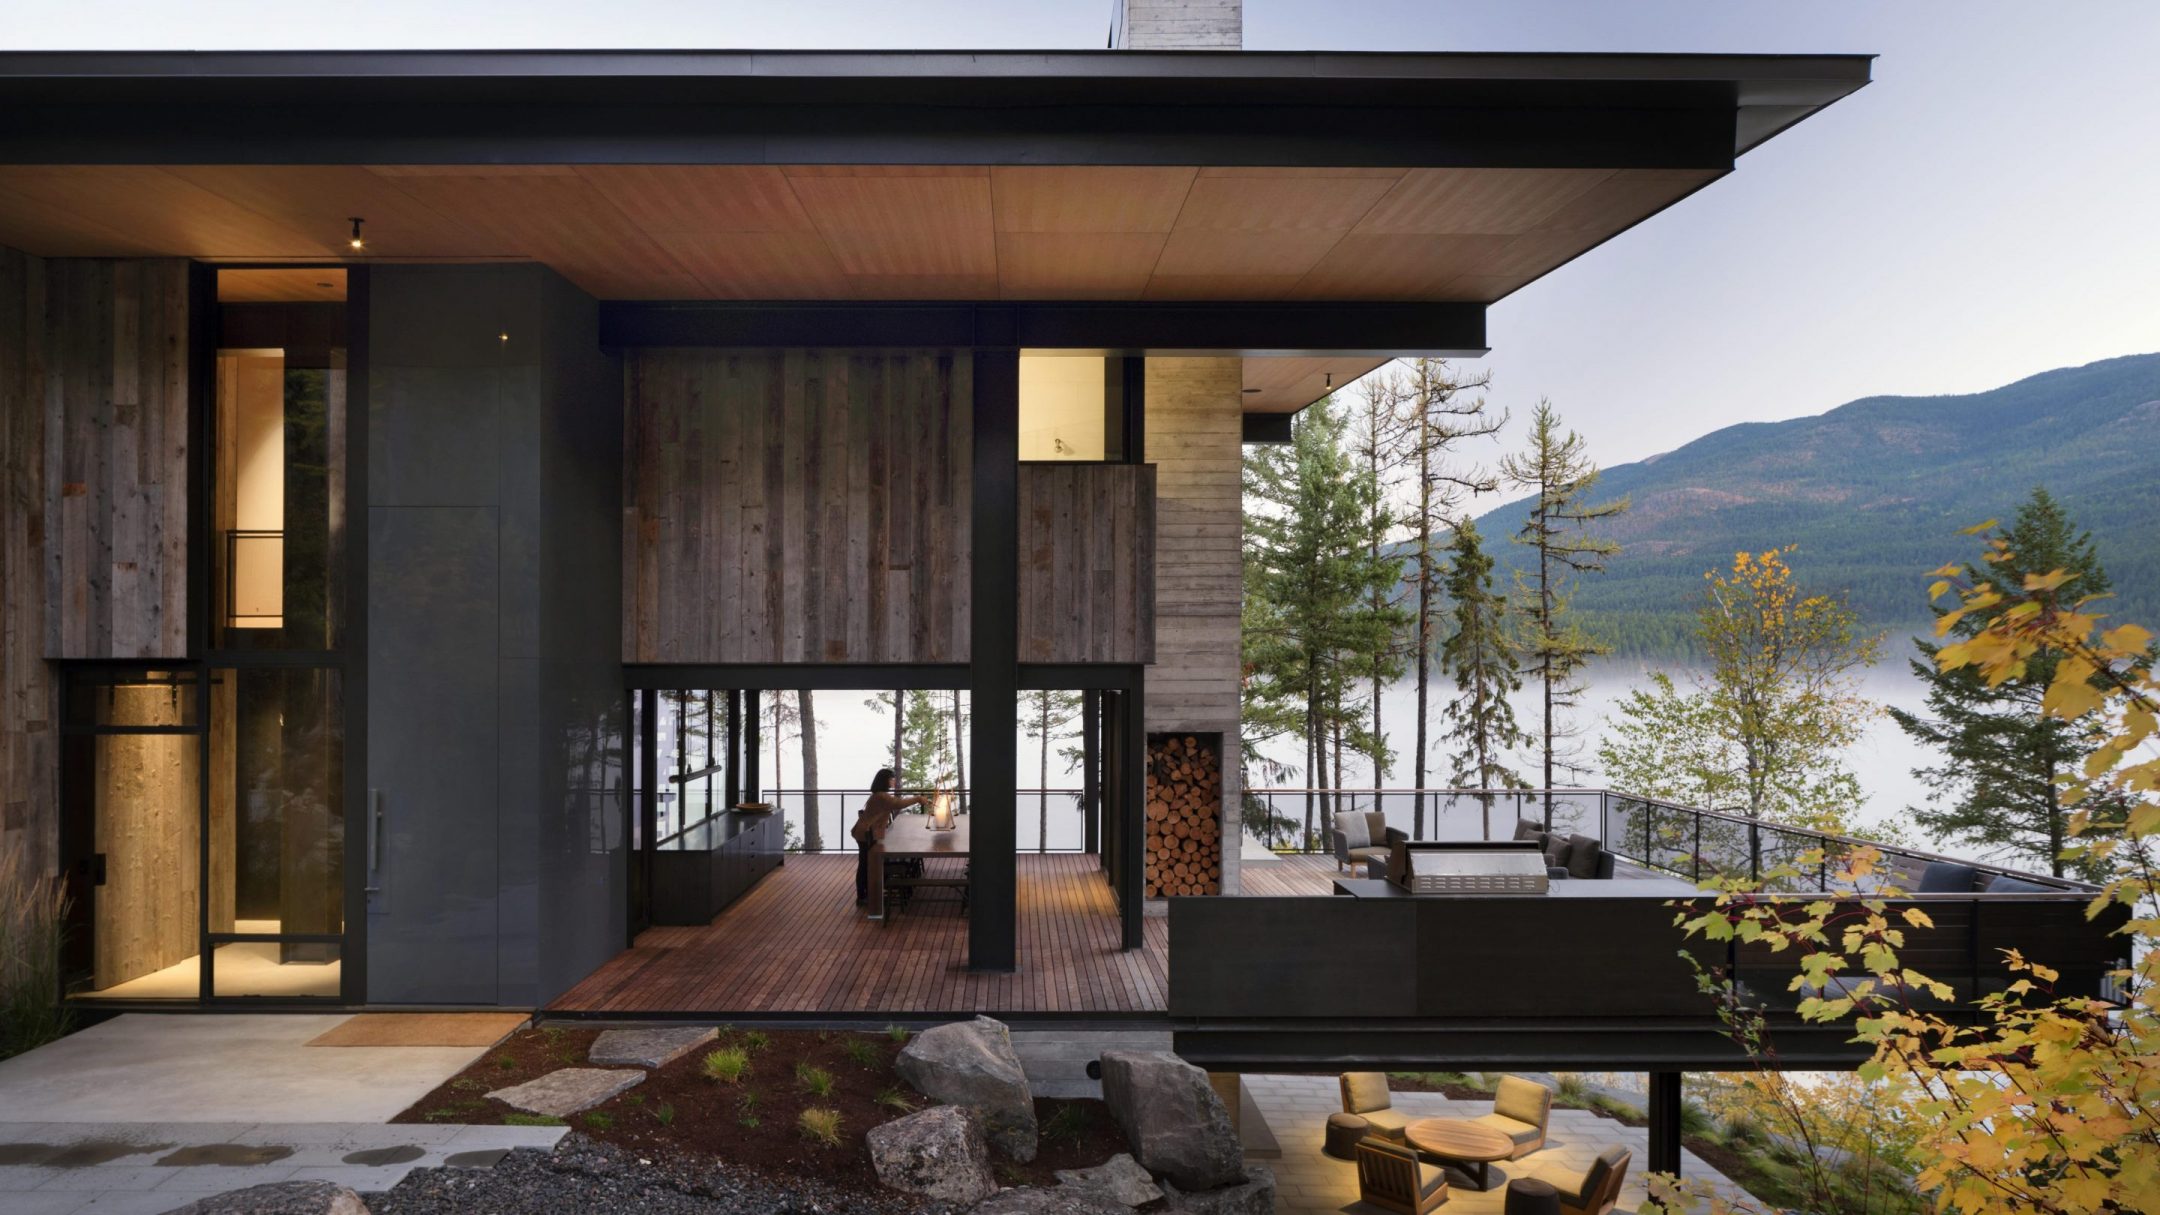 Olson Kundig A Collaborative Global Design Practice Whose Work Expands The Context Of Built And Natural Landscapes,Beautiful Bathroom Designs